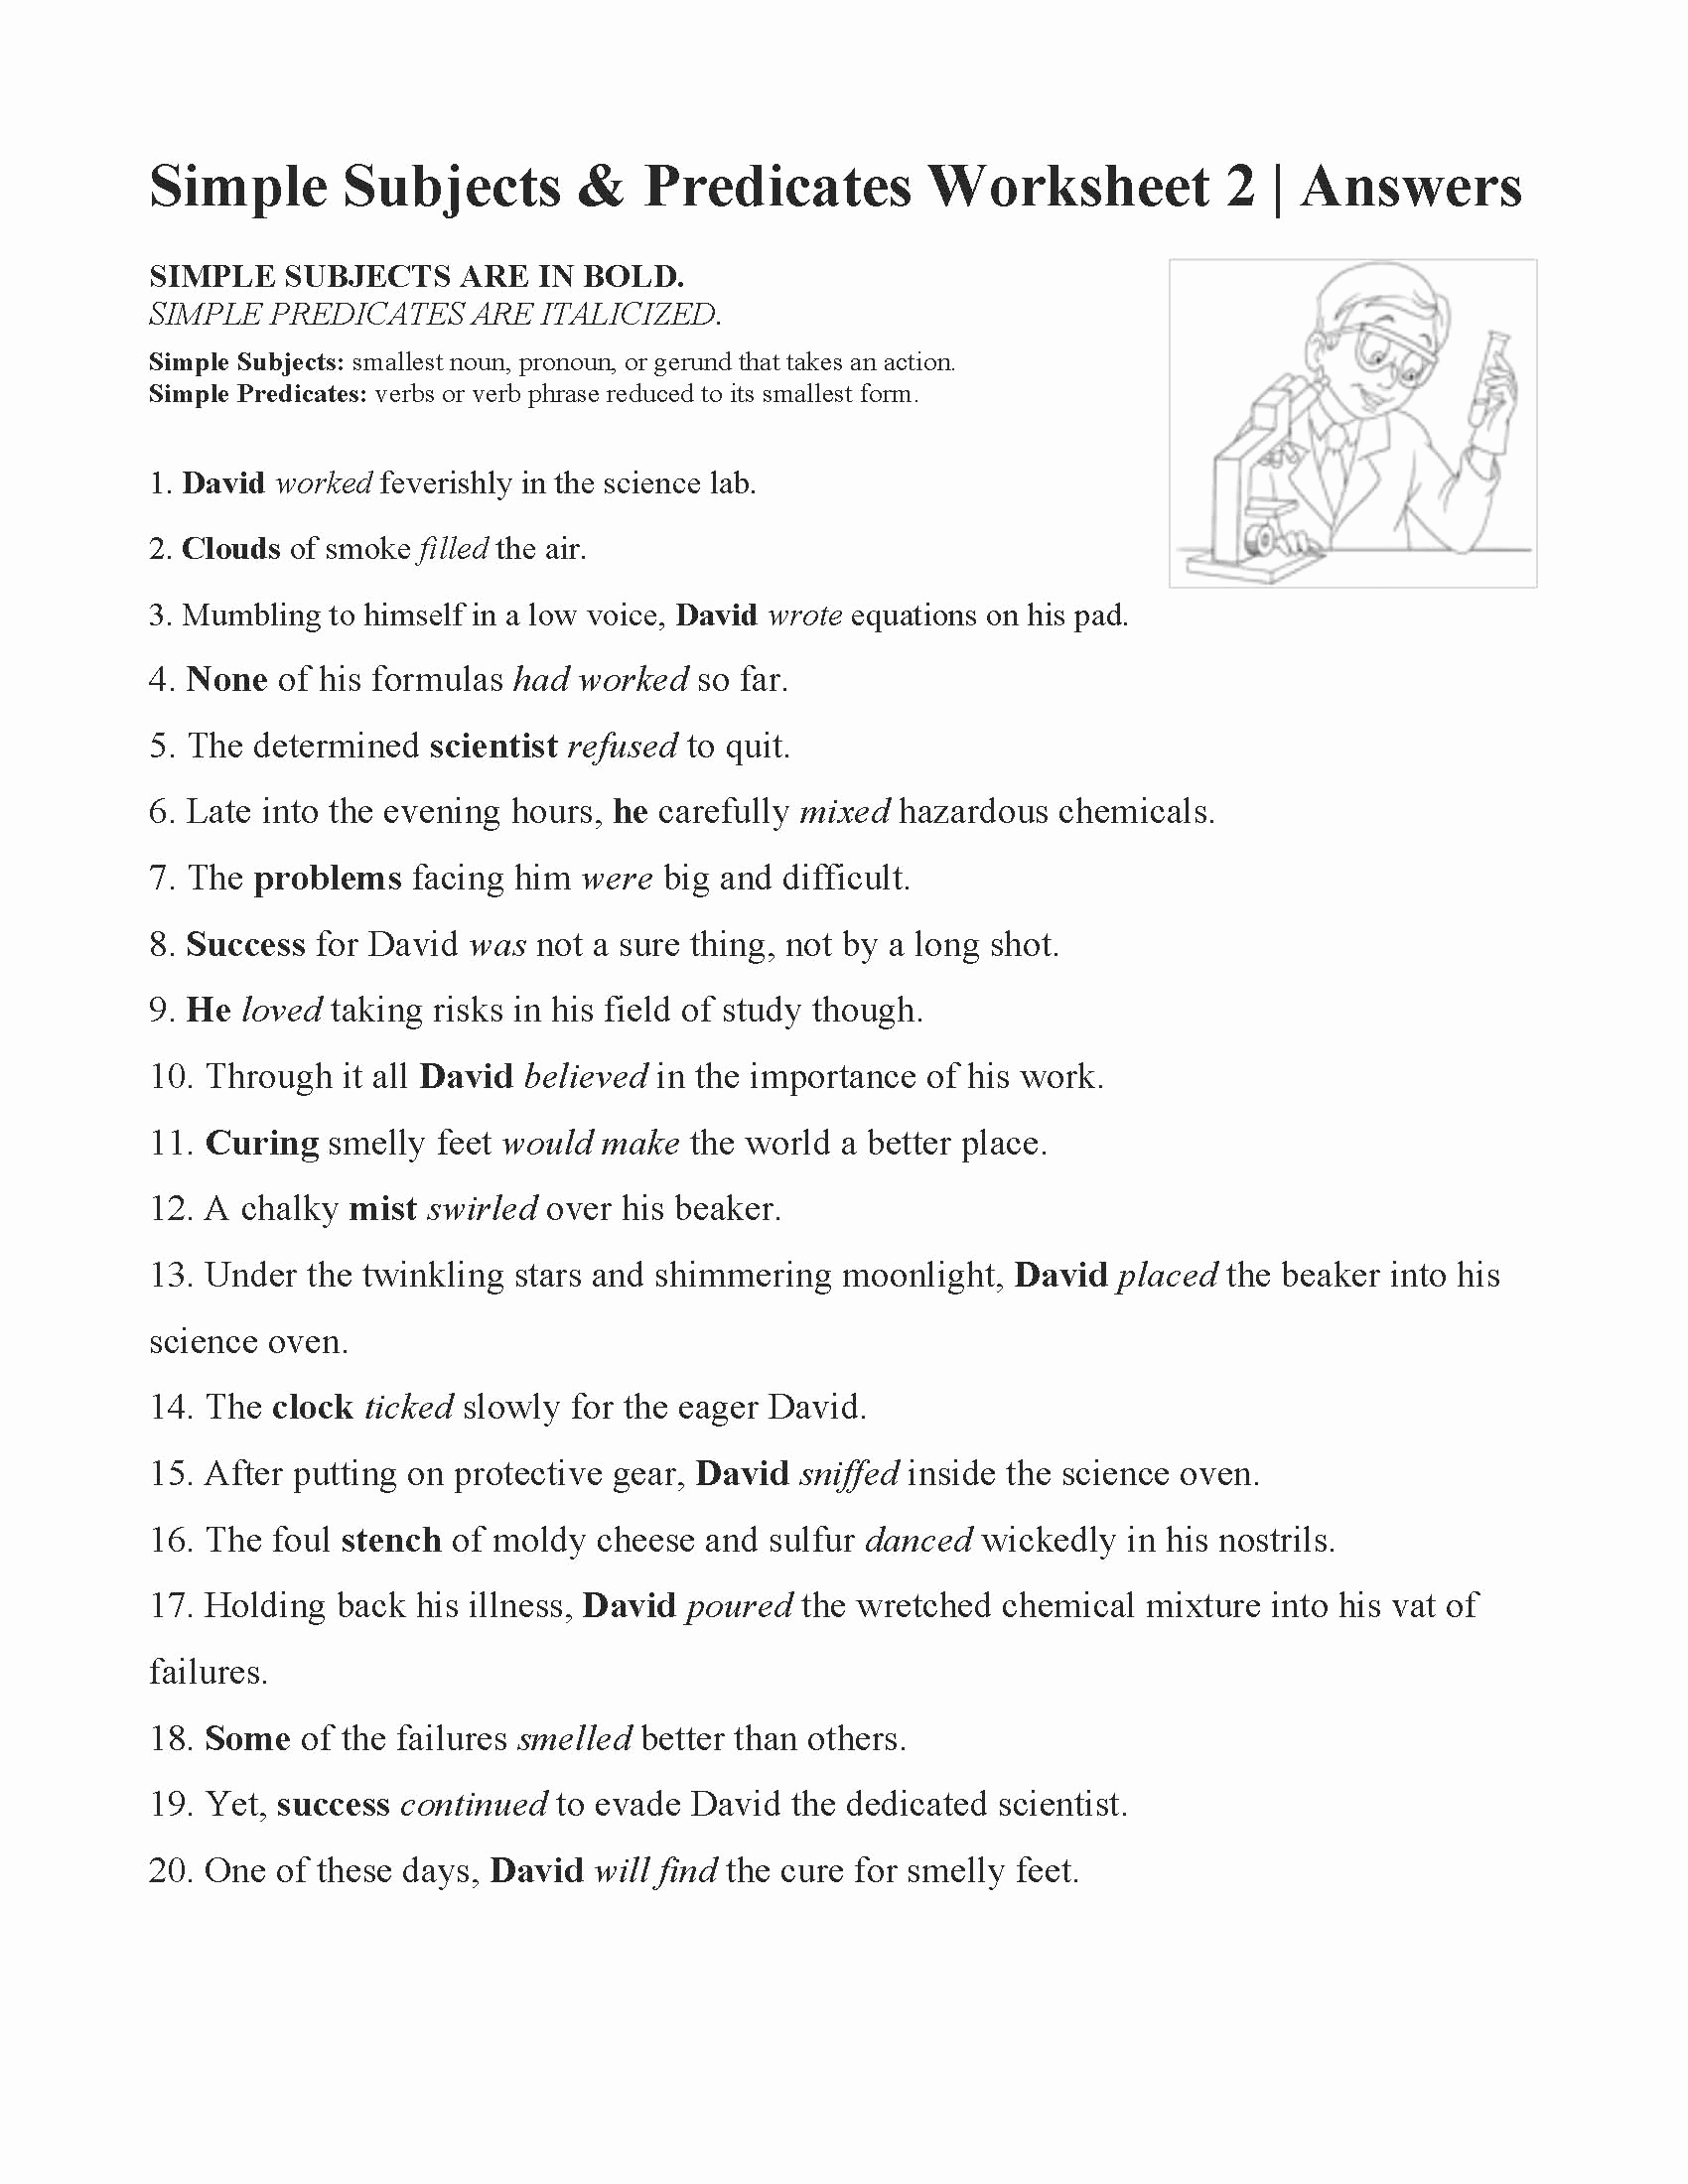 Free Subject and Predicate Worksheets Luxury Simple Subjects and Predicates Worksheet 2